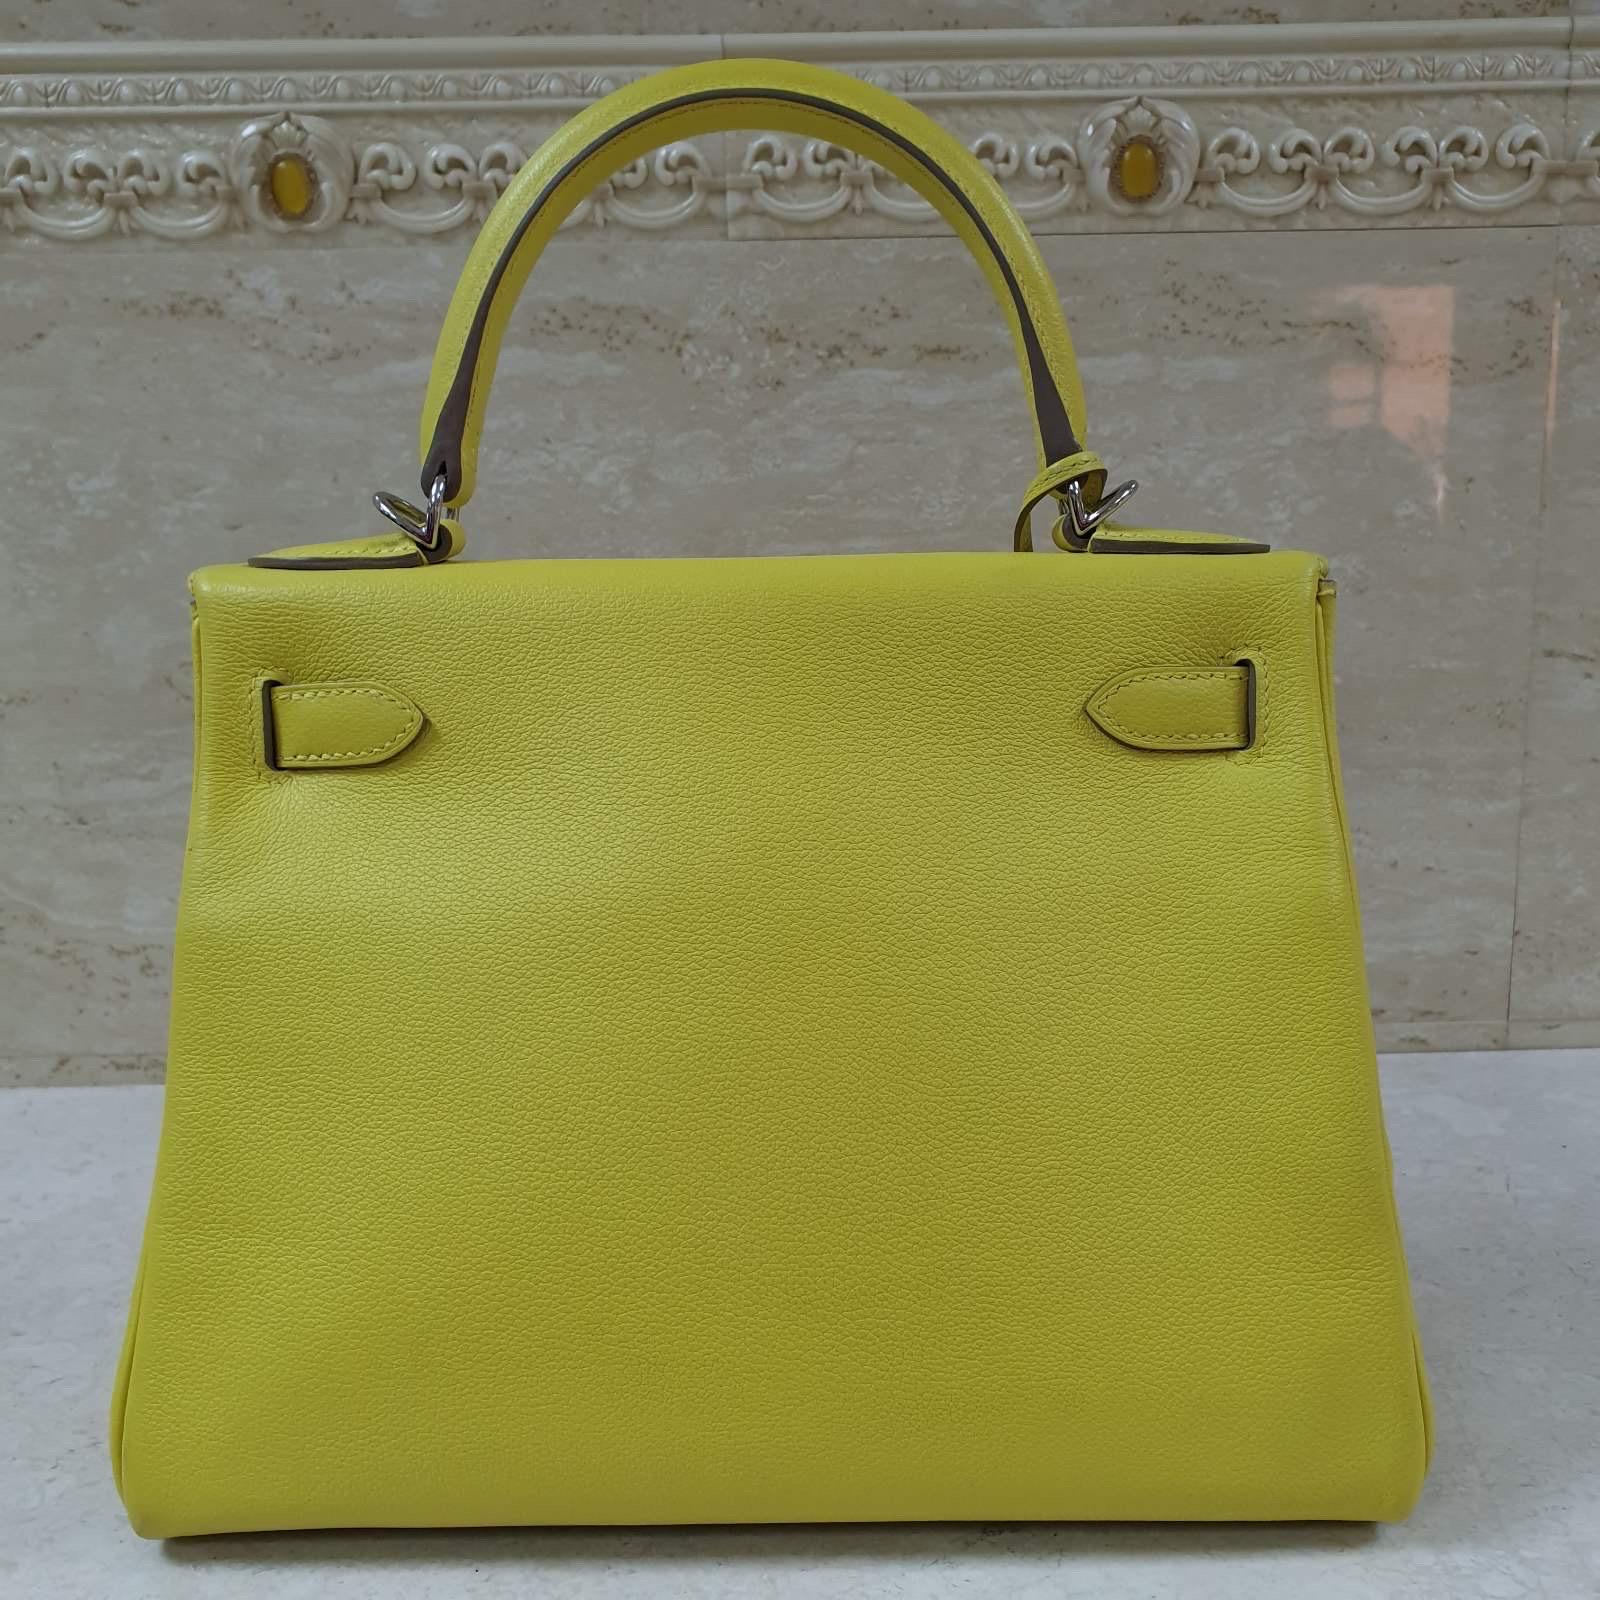 Kelly 28
Colour: Lime
Veau Evercolor leather
Palladium plated HW
2020
Very good condition.
No box. No dust bag.